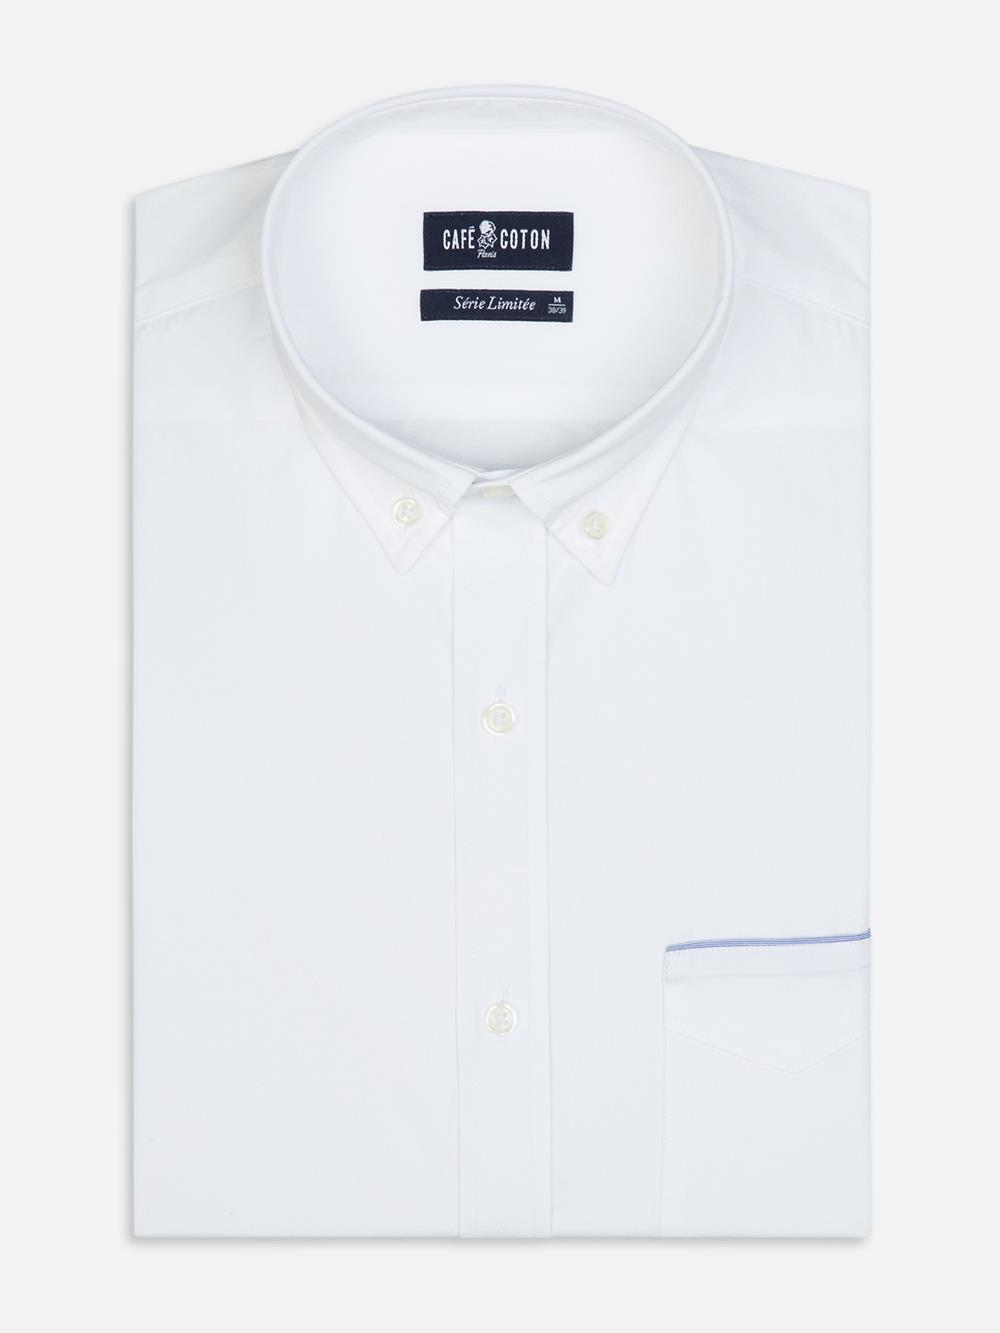 White poplin shirt with button-down collar - Limited Edition